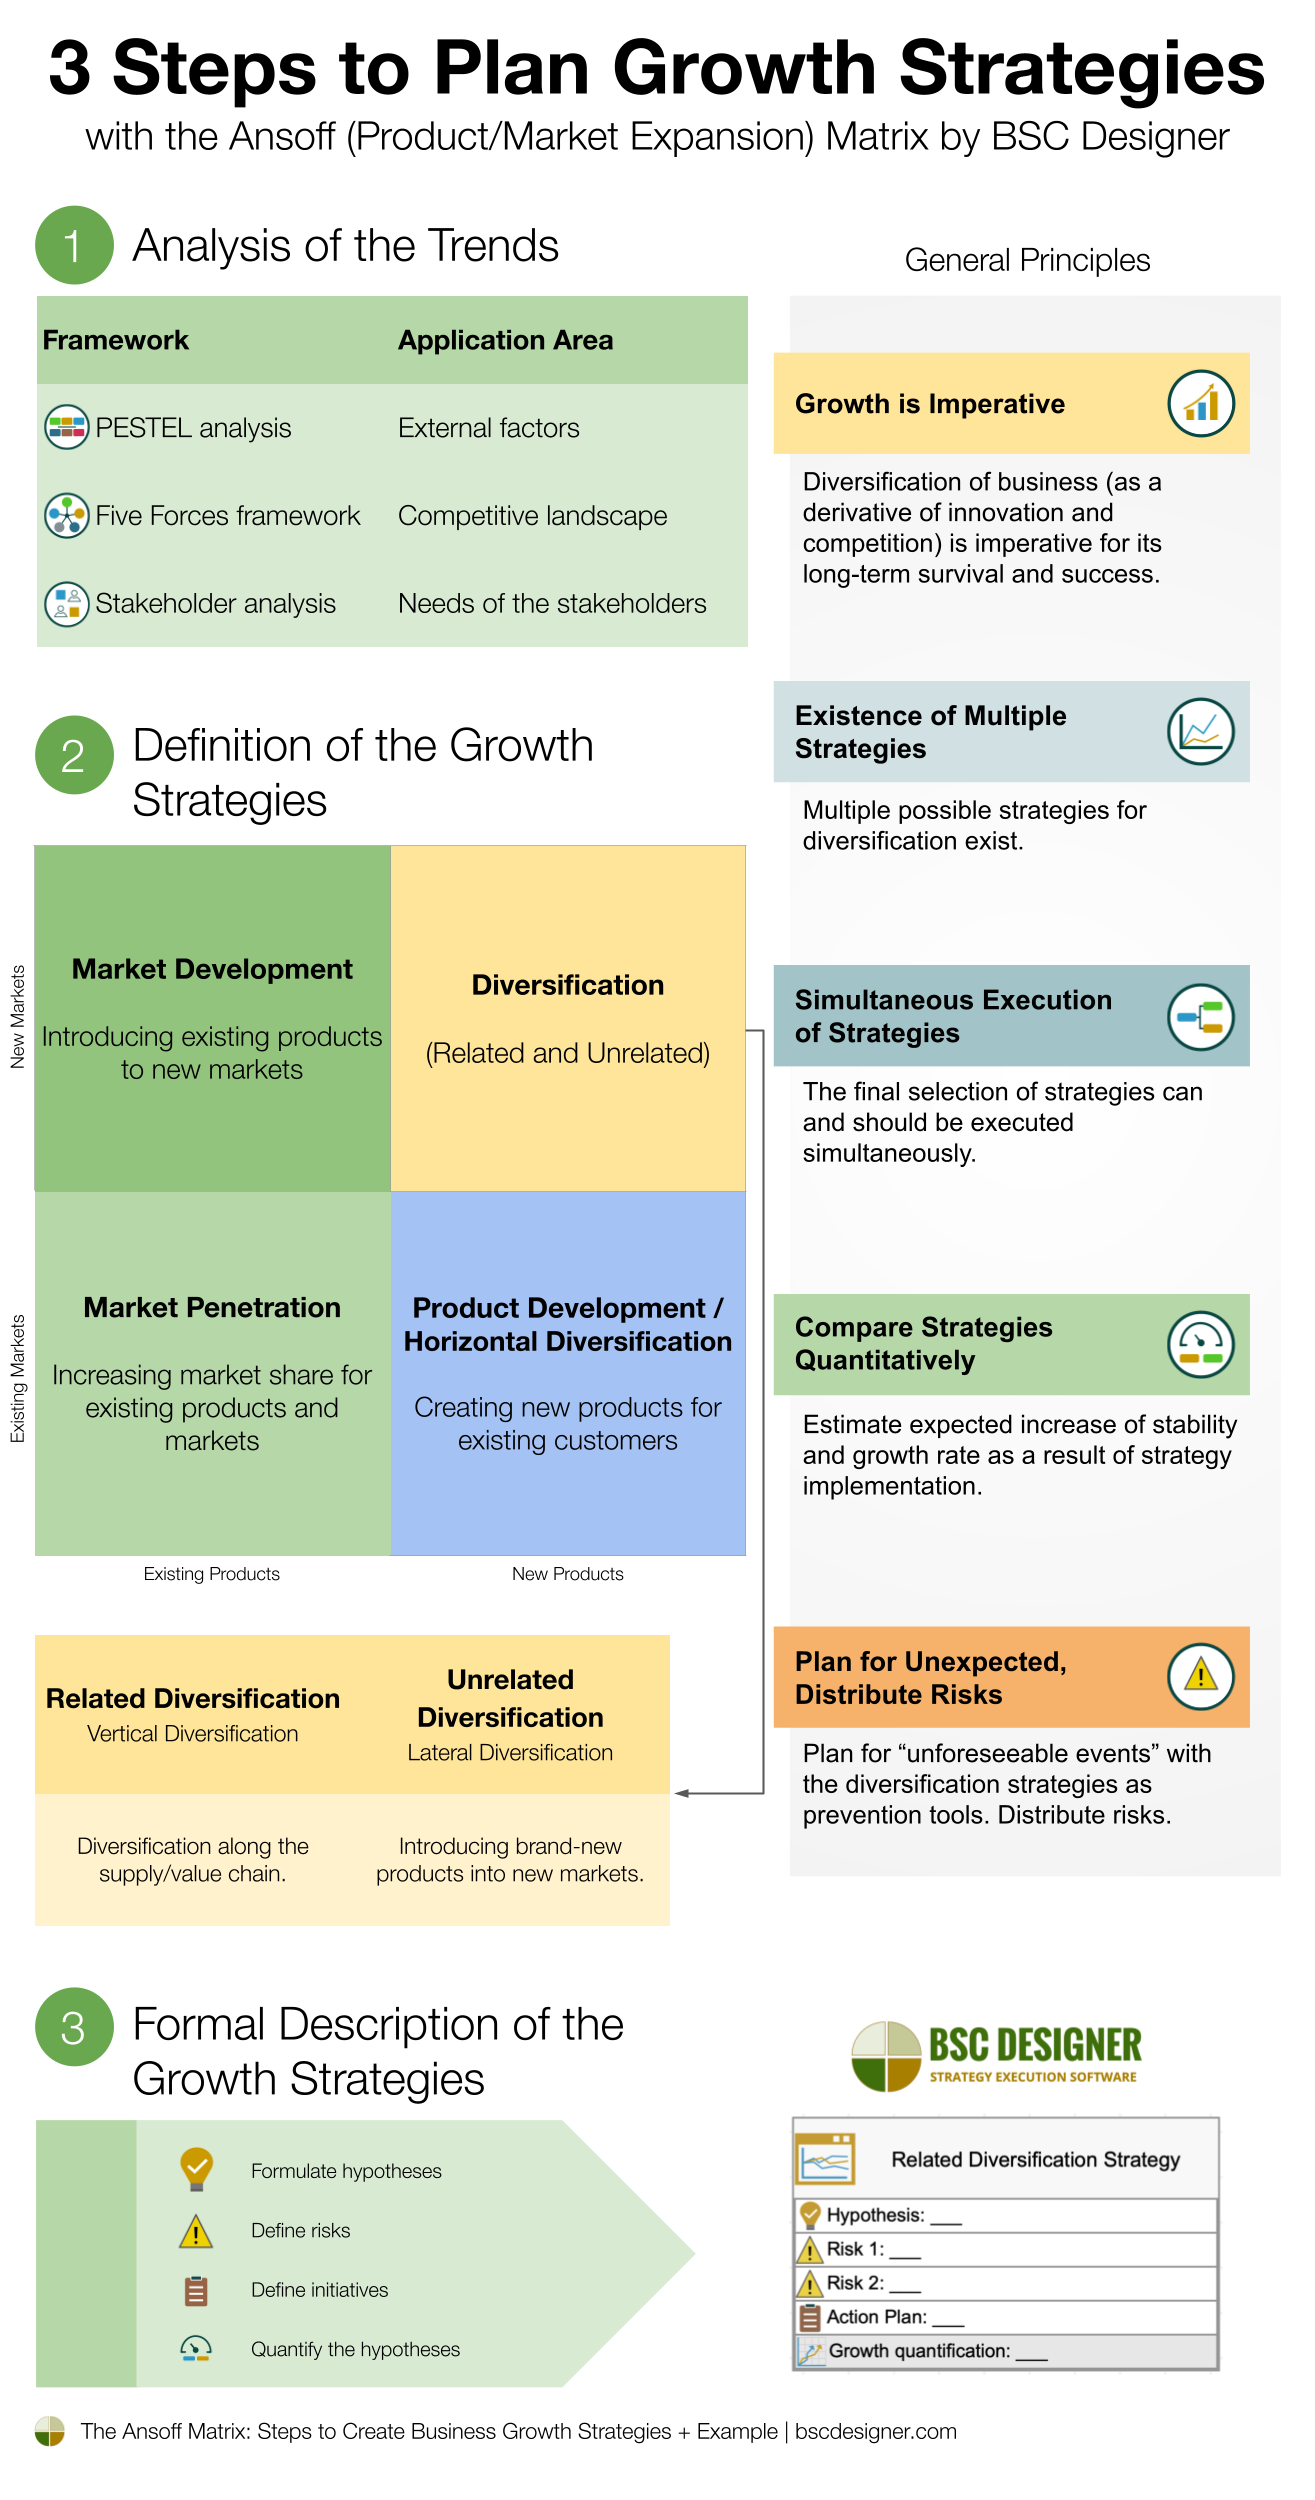 3 Steps to Plan Growth Strategies with the Ansoff (Product/Market Expansion) Matrix by BSC Designer